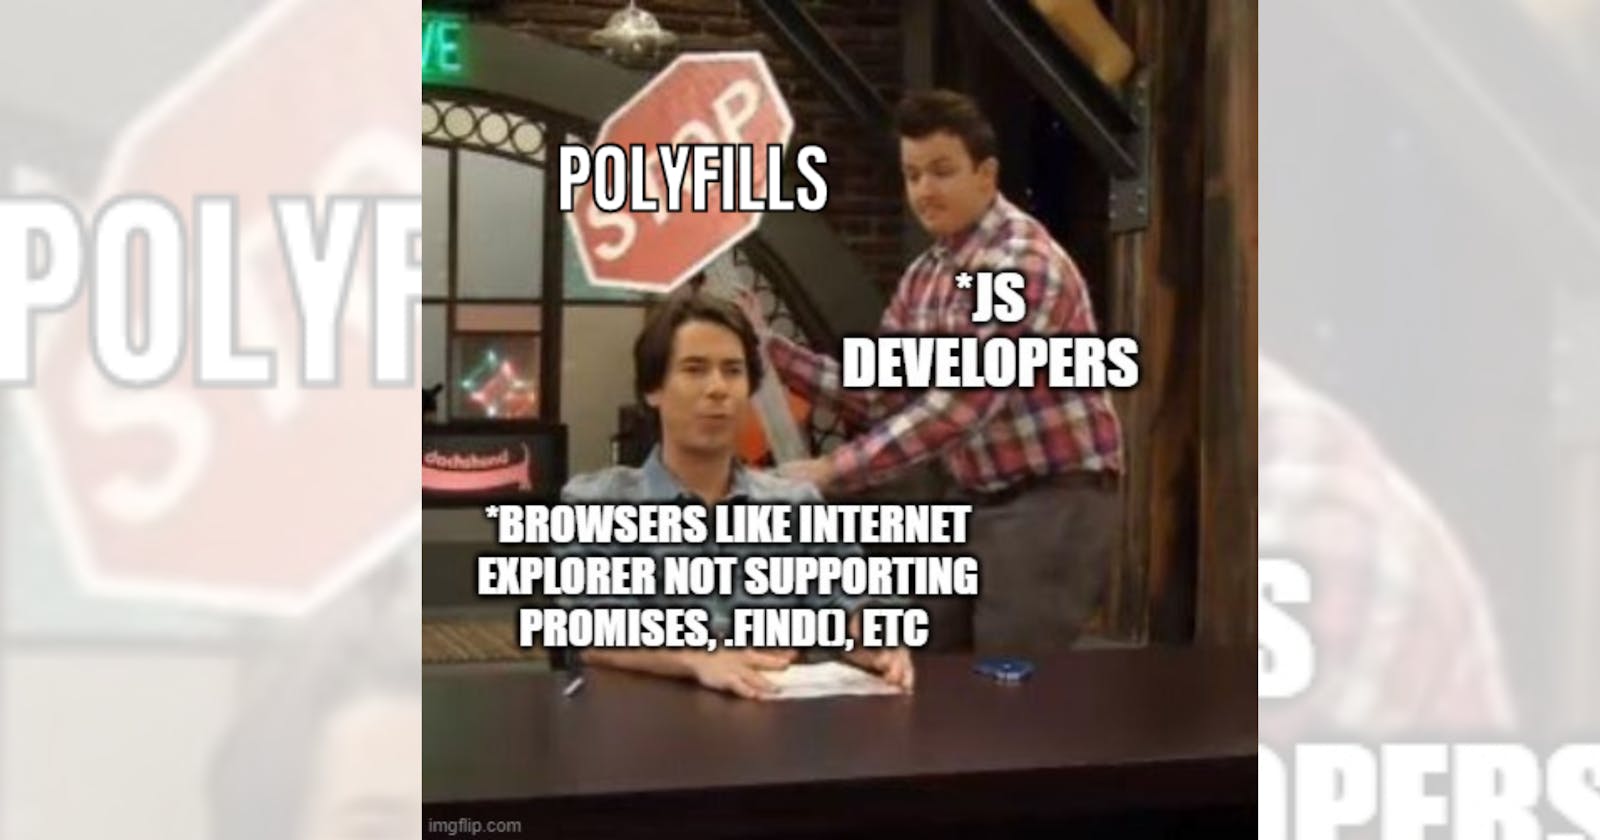 Polyfills in JavaScript. kids wait for browser's update, legends make their own polyfill.